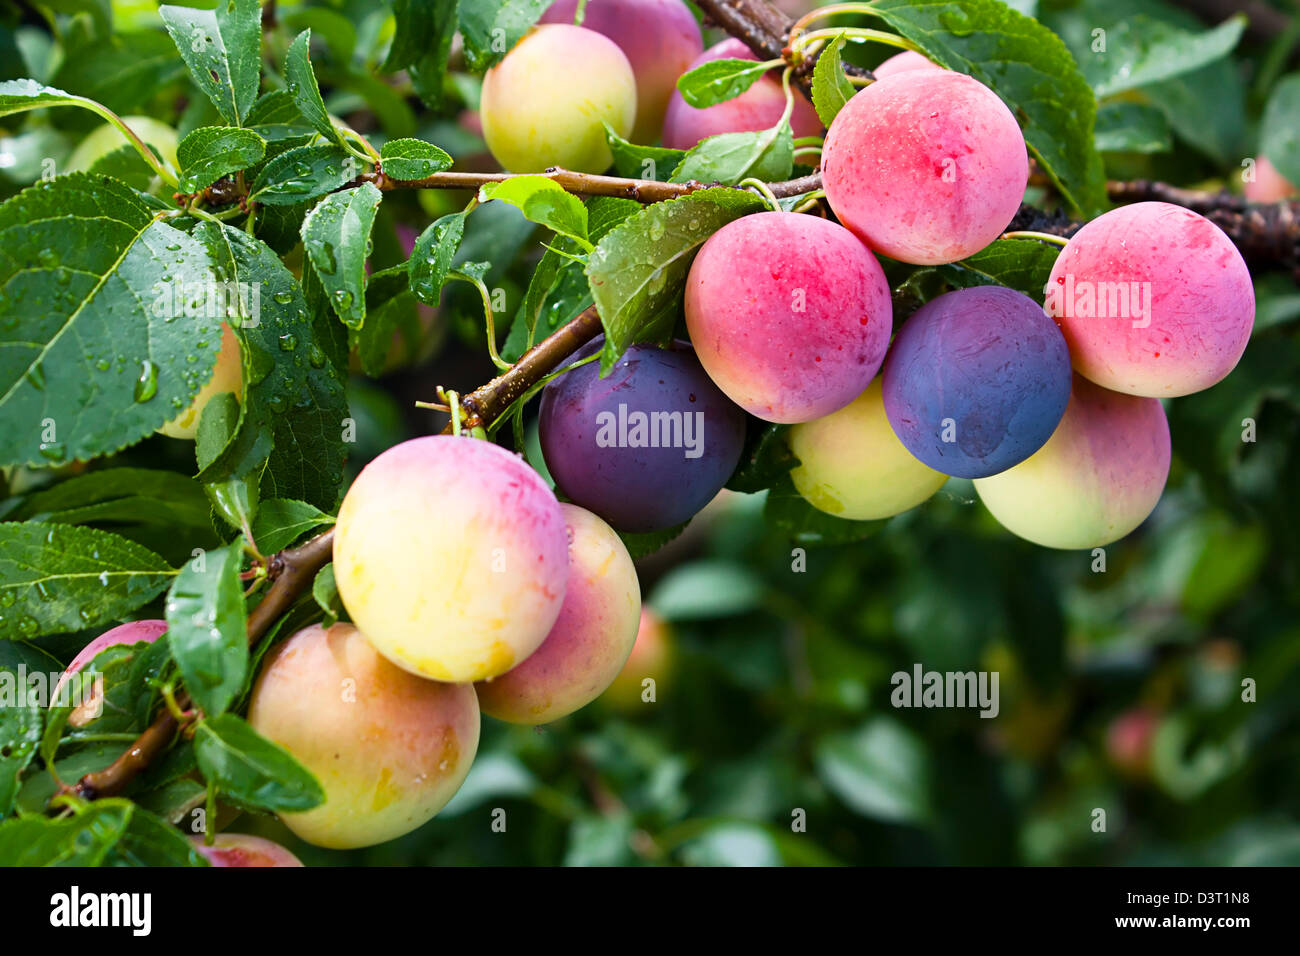 Plums or damsons ripening on a tree branch Stock Photo